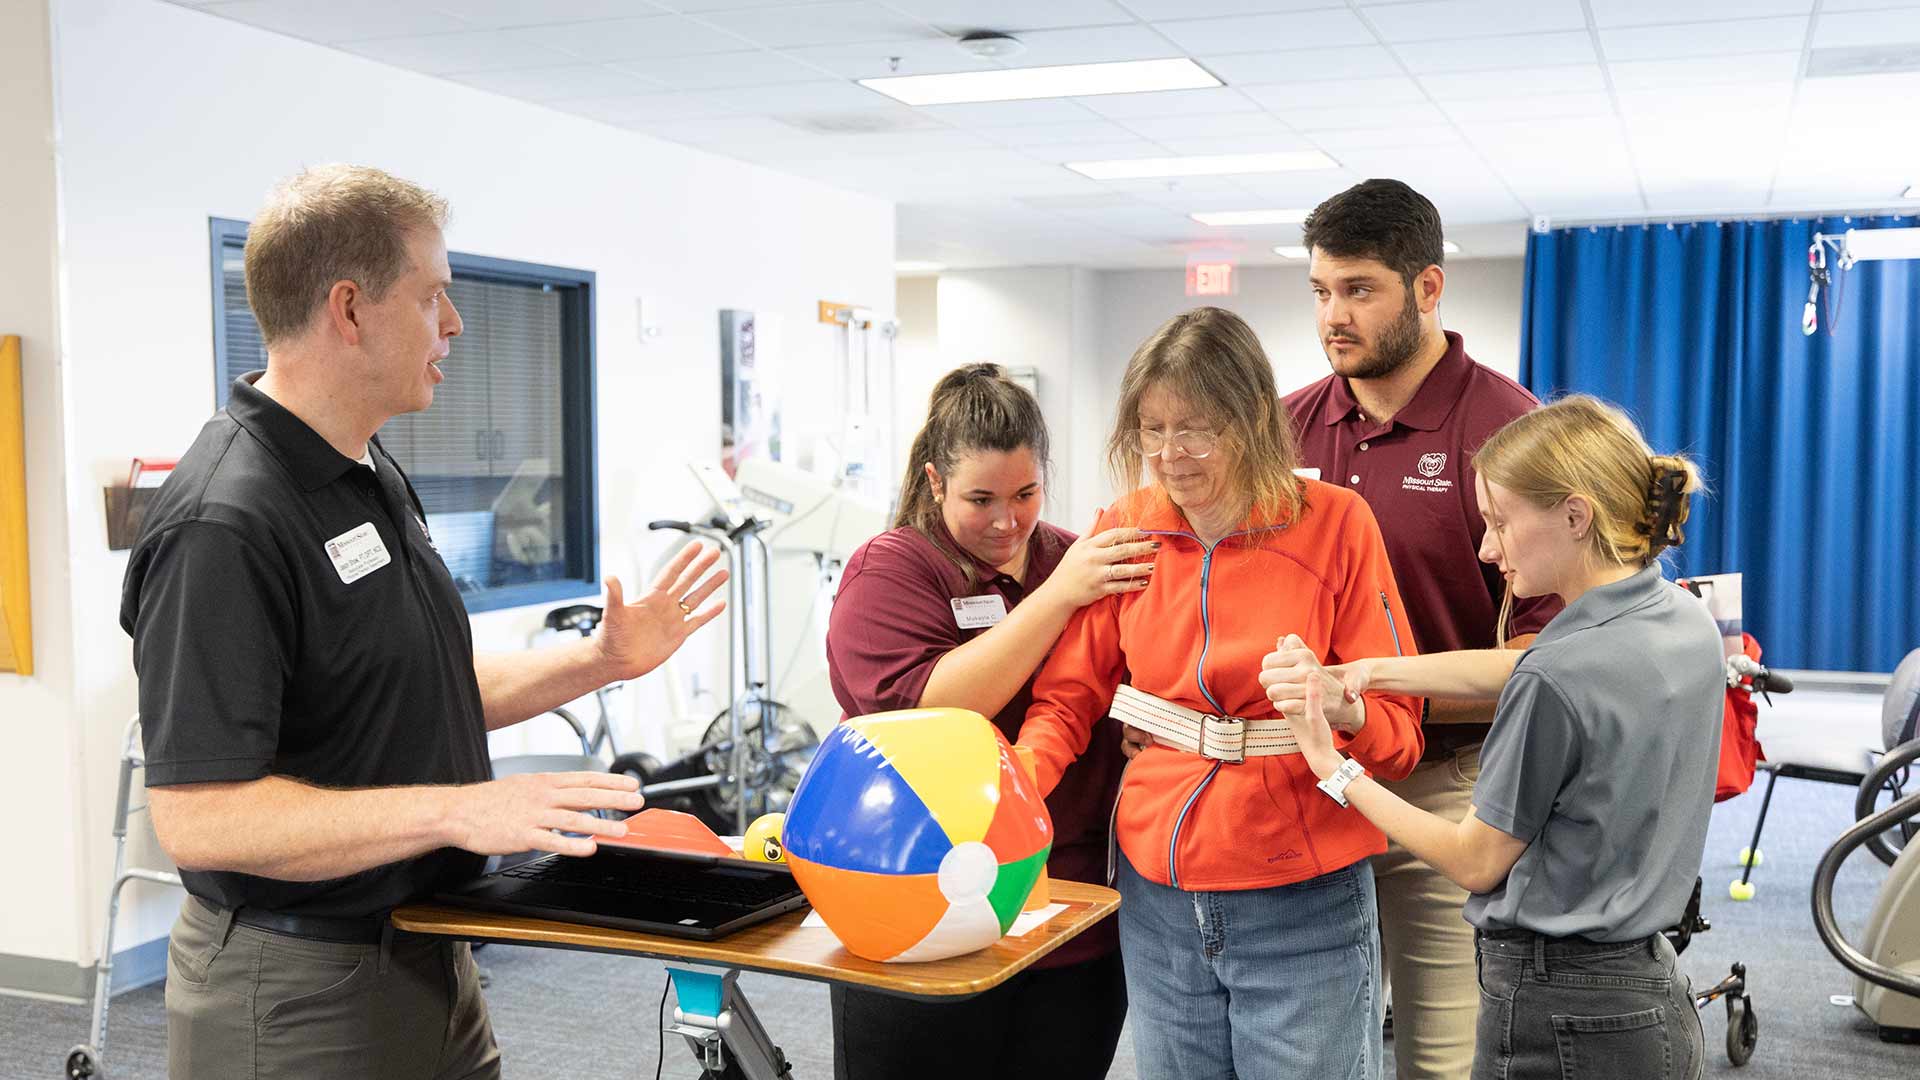 A physical therapy professor provides instruction as three students help a client move around at the Physical Therapy Clinic on campus.